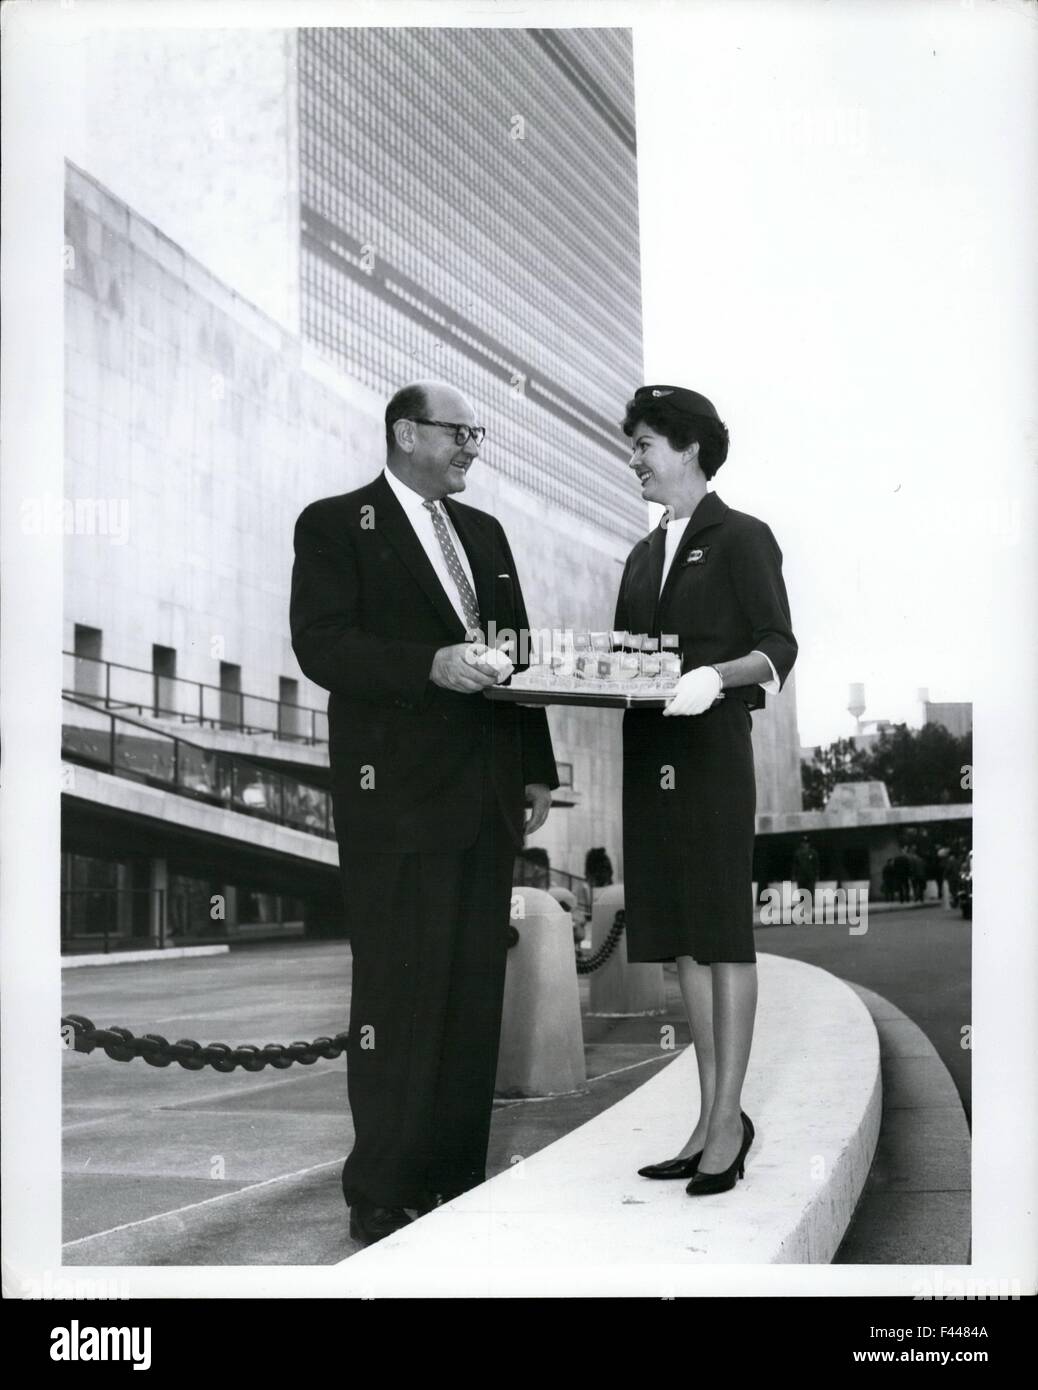 For Release Sunday, Oct. 24th Feb, 1972. 23, Or Thereafter: U.S. Ambassador James J. Wadsworth accepts a piece United nations''birthday cake'' from Trans World Airlines hostess Ann Lennon outside U.N. headquarters in New York. Similar pieces of pastry, frosted in white with blue''U.N.'' initials and decorated with miniature U.N. flags, will be served to passengers on TWA flights Oct. 24, in observance of United Nations Day. miss Lennon is from New Hyde Park, Long island. © Keystone Pictures USA/ZUMAPRESS.com/Alamy Live News Stock Photo